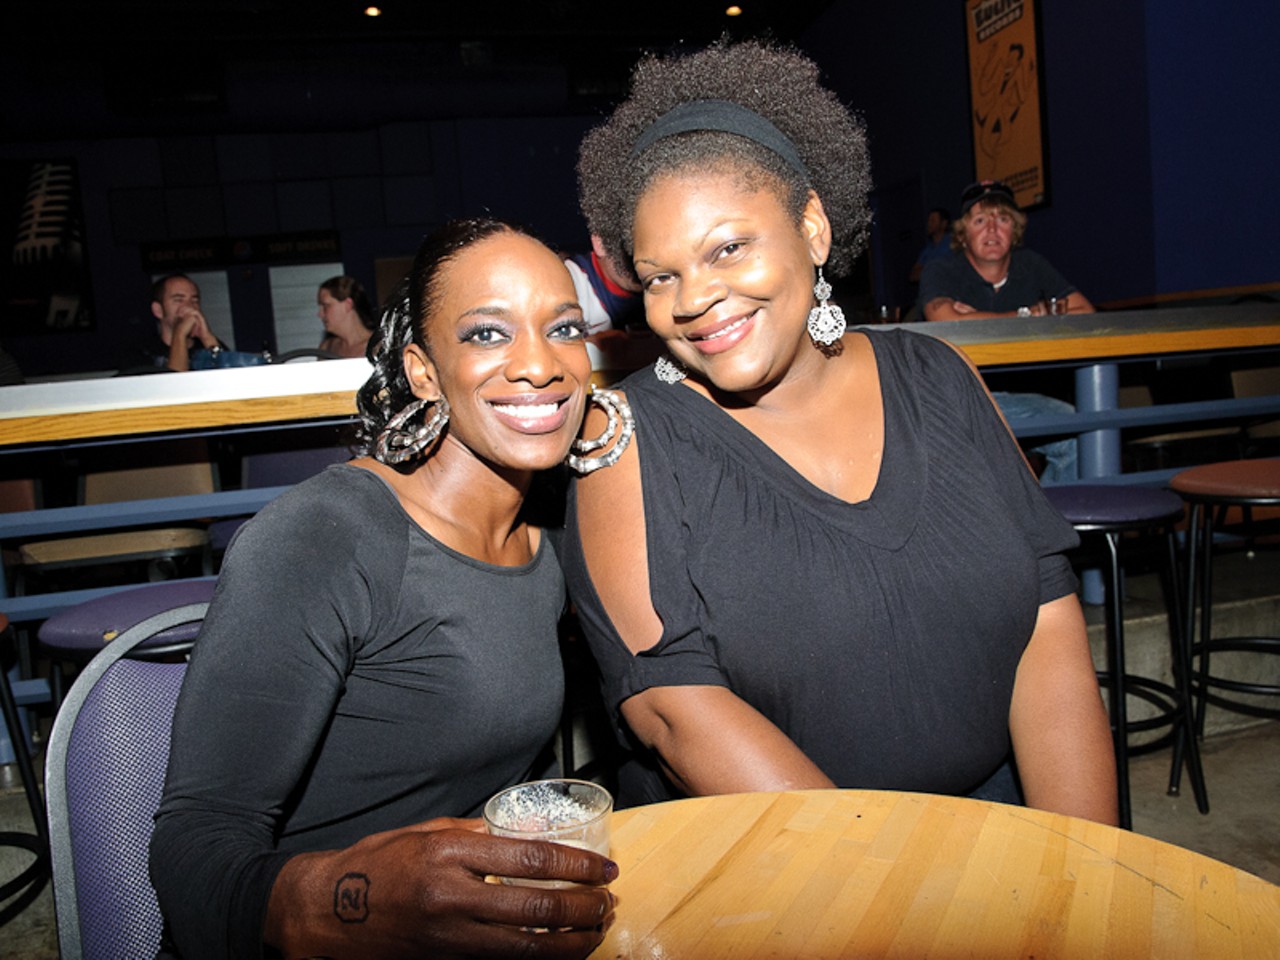 Michelle Scott and Niki Bridges were there for the classics, such as "Insane in the Membrane."